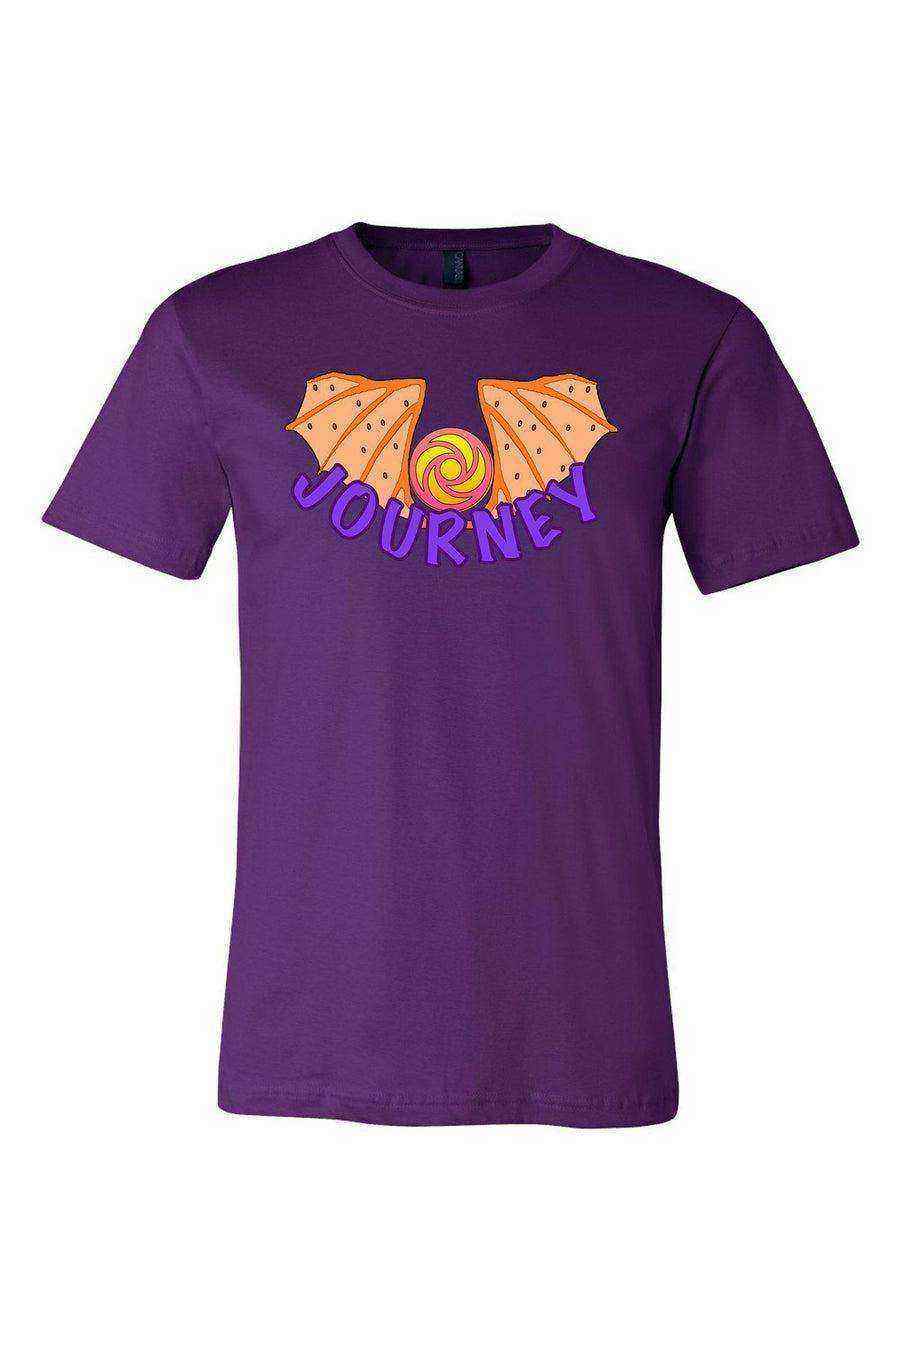 Womens | Figment Band Tee | Journey Shirt - Dylan's Tees